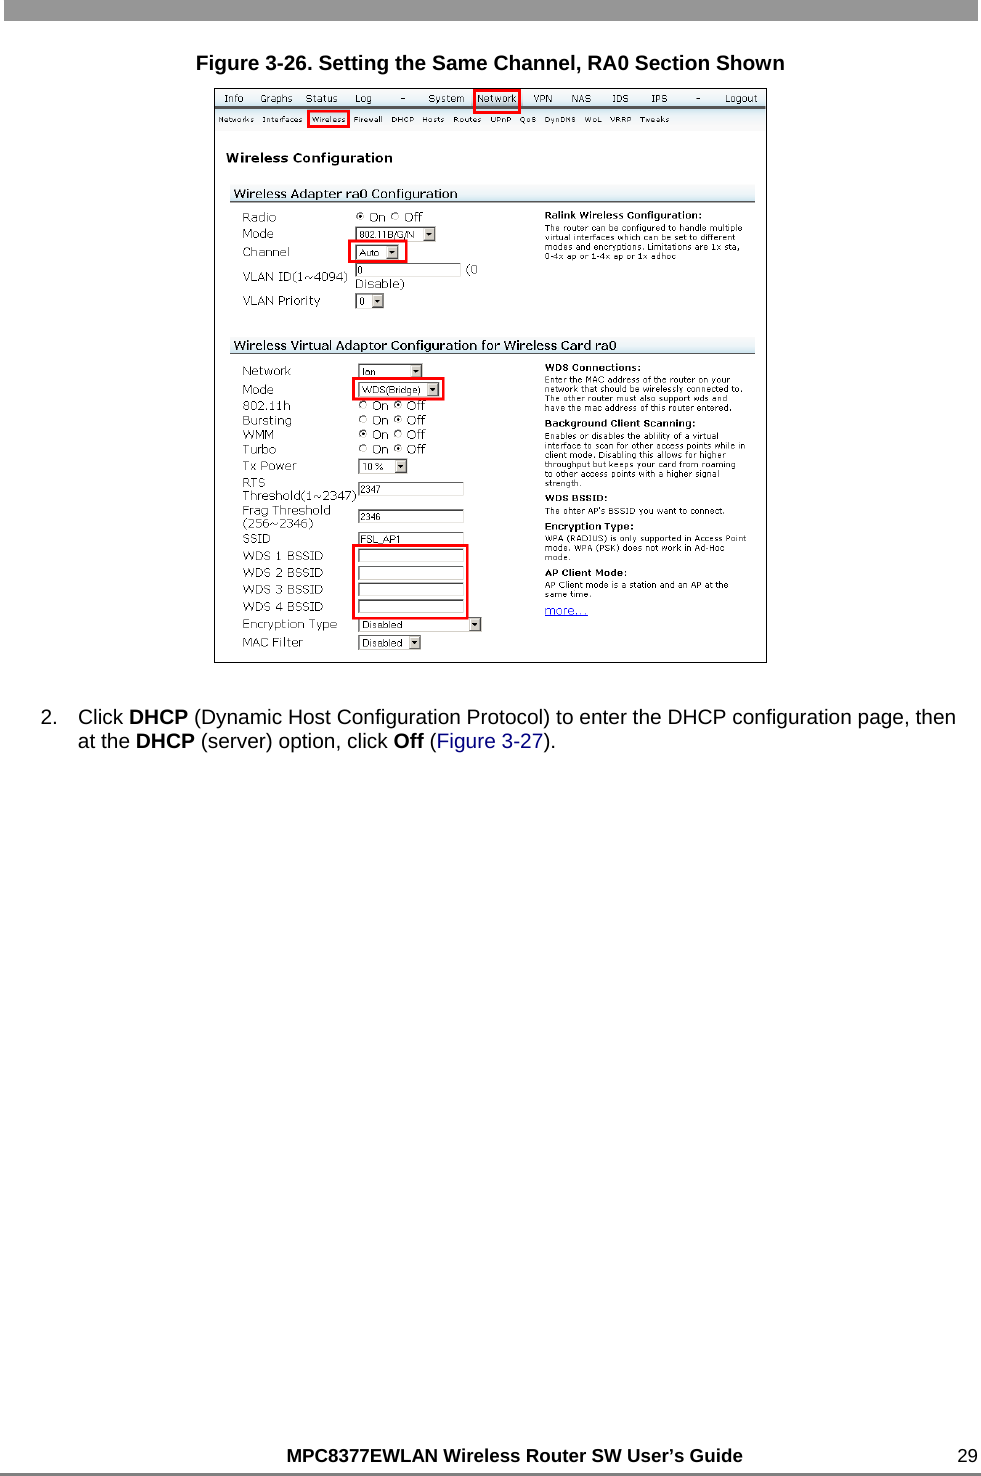                                                          MPC8377EWLAN Wireless Router SW User’s Guide    29 Figure 3-26. Setting the Same Channel, RA0 Section Shown  2. Click DHCP (Dynamic Host Configuration Protocol) to enter the DHCP configuration page, then at the DHCP (server) option, click Off (Figure 3-27). 